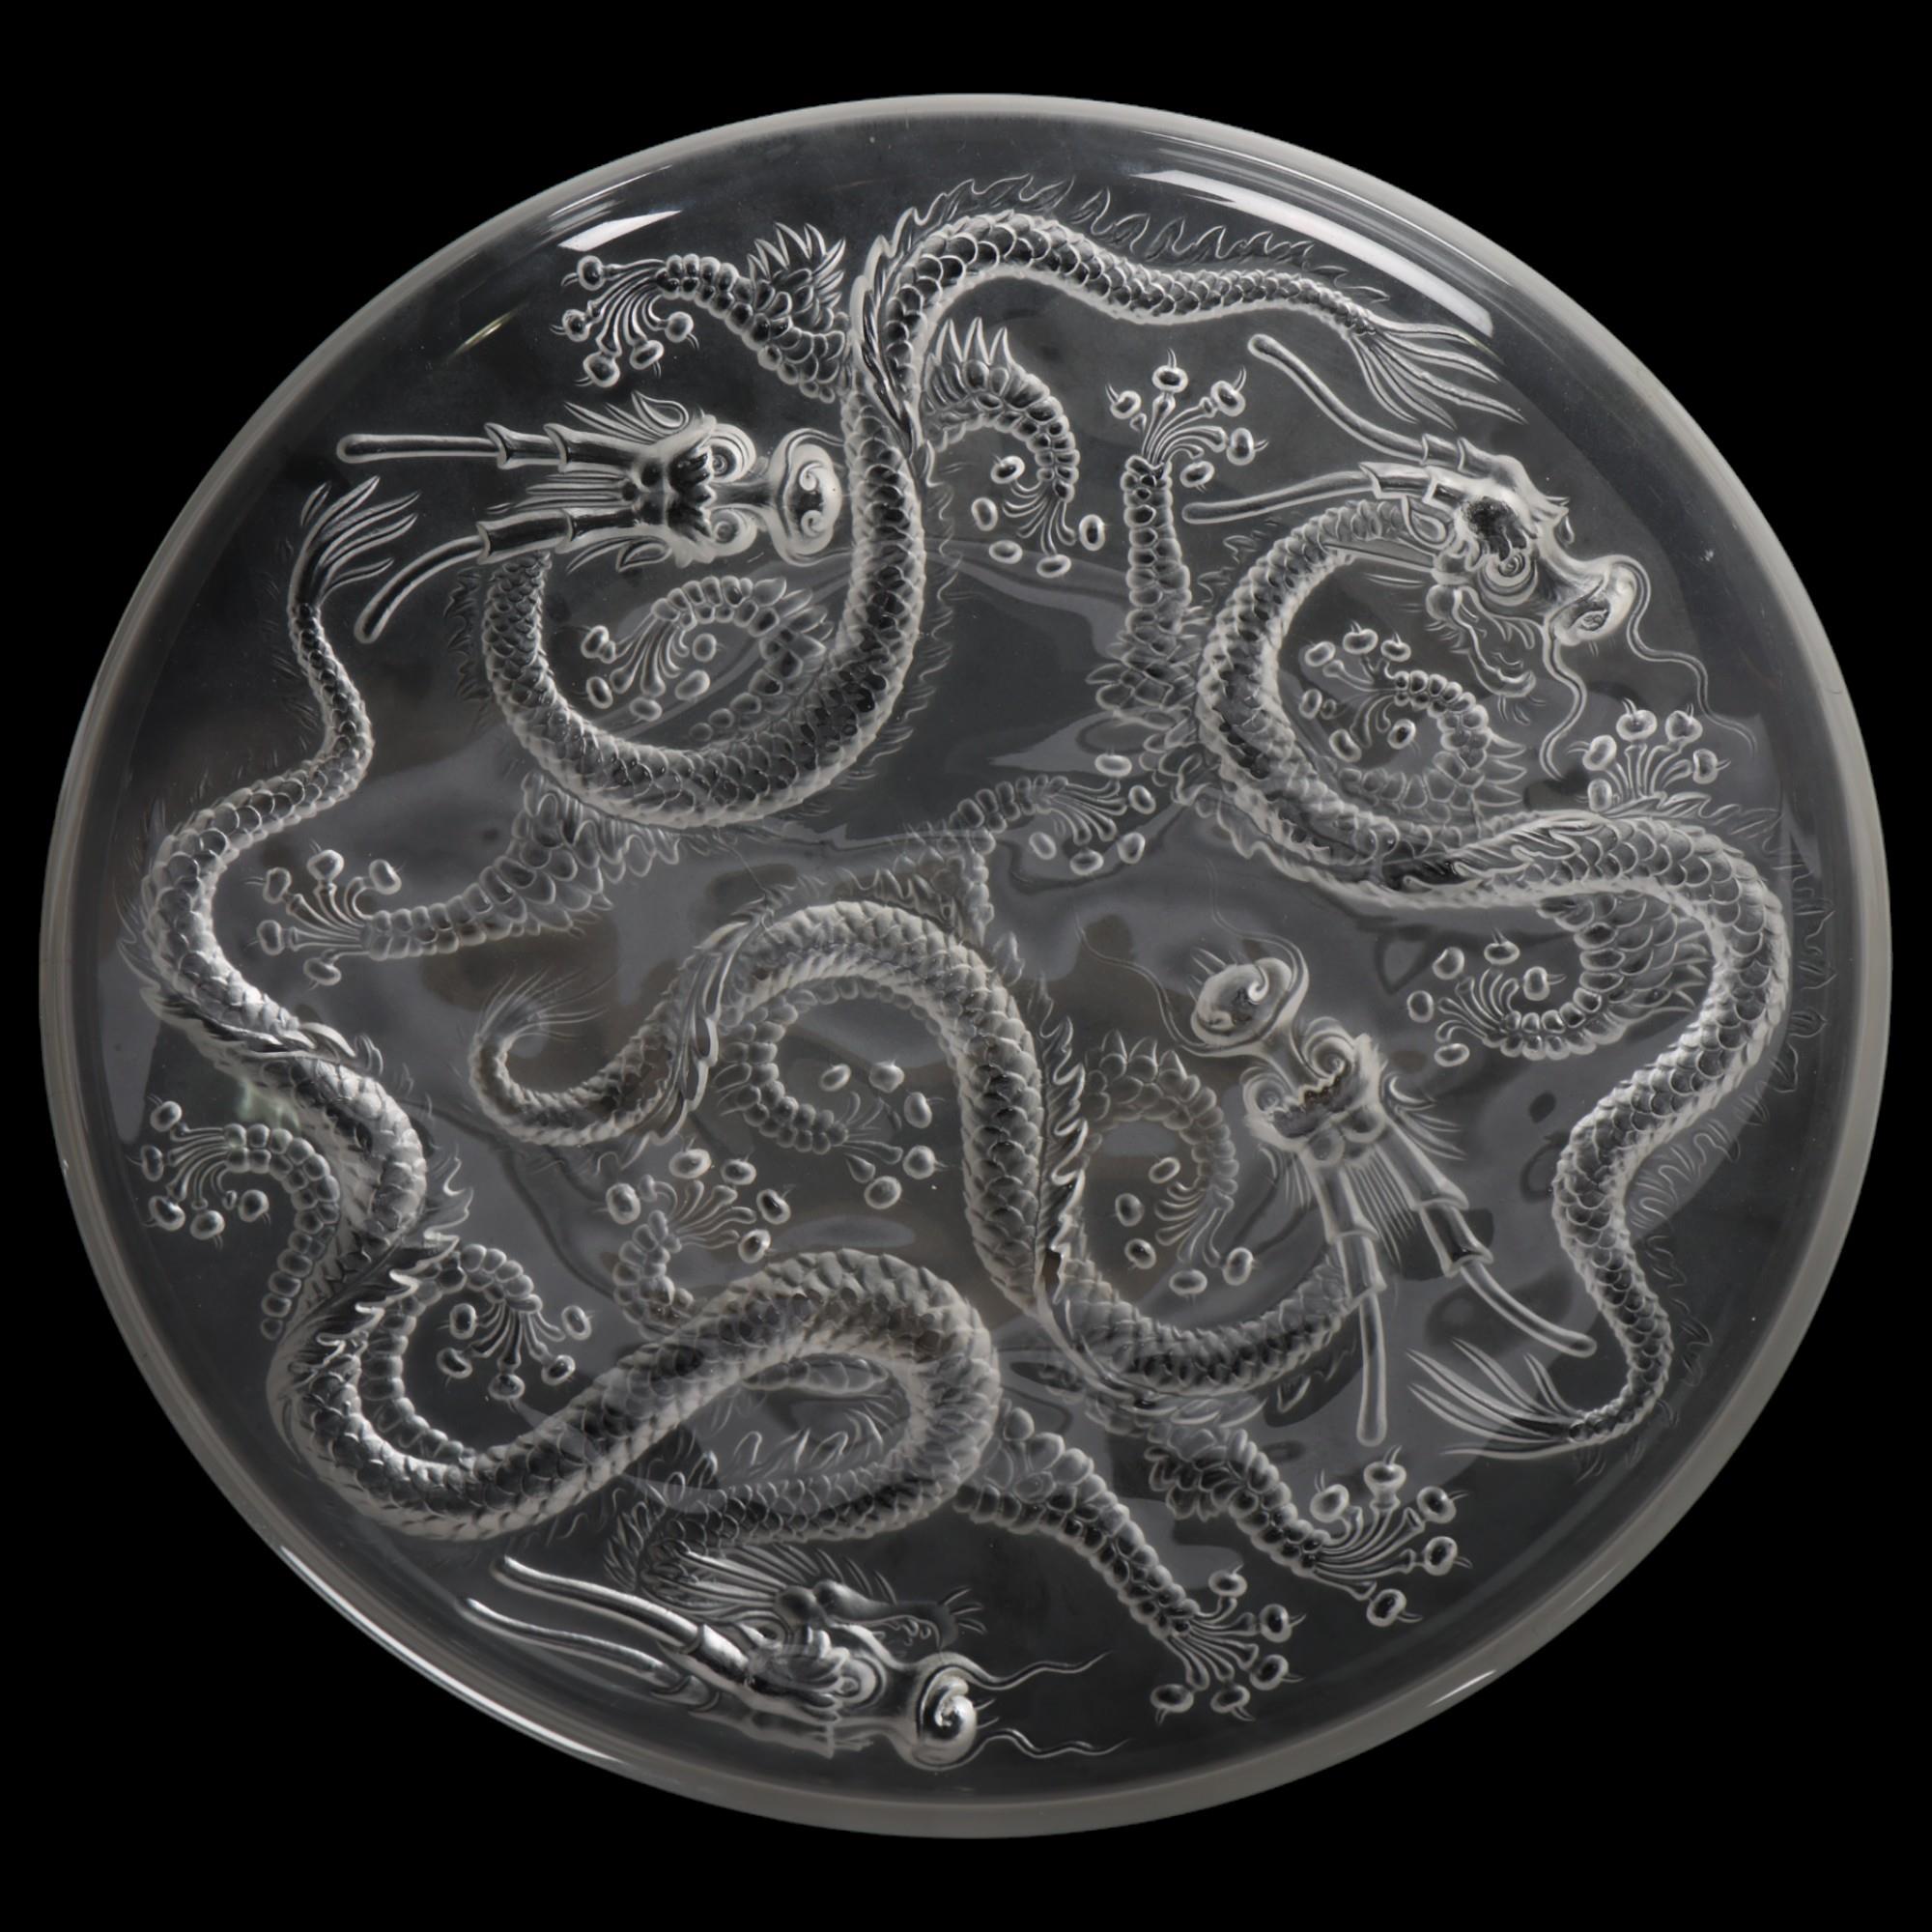 JOSEPH INGWALD for Barolac, Czech, a large “Dragon” plate manufactured in frosted pressed glass,